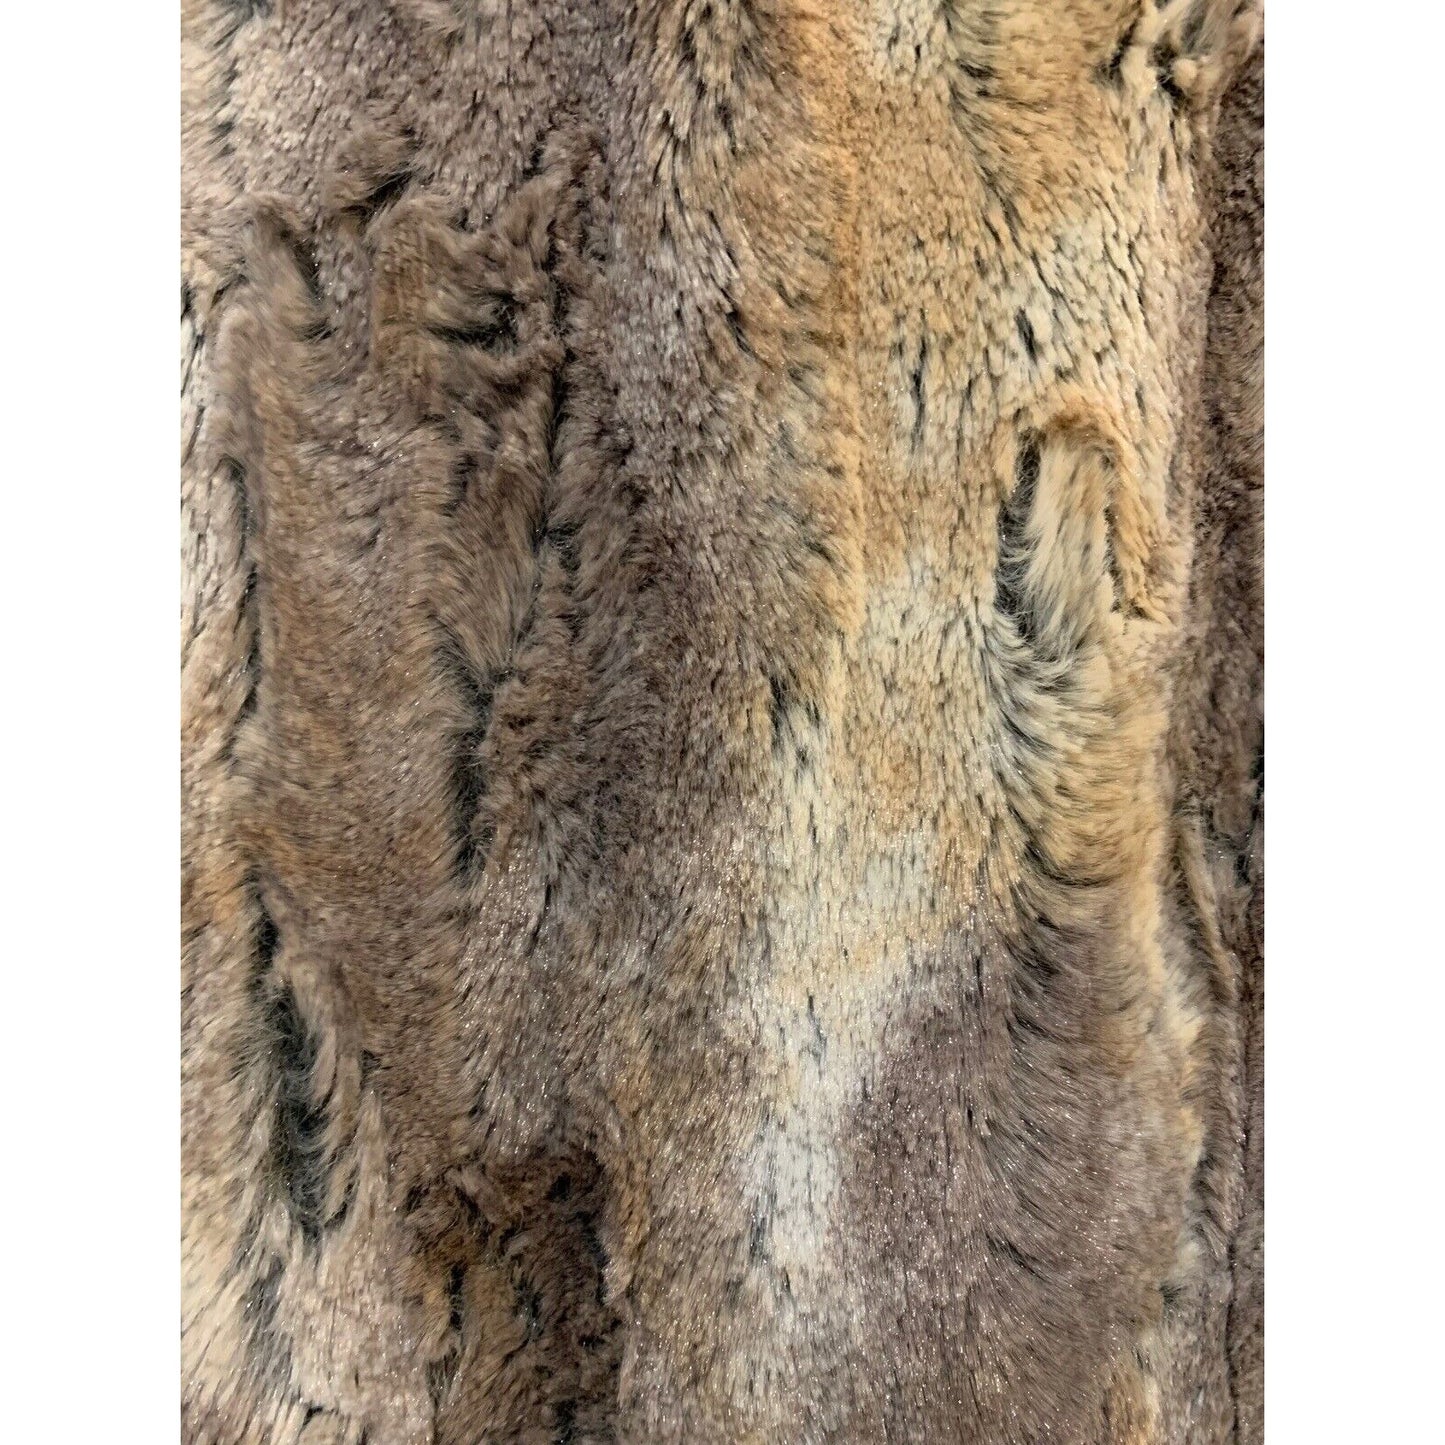 Erin London Women’s Faux Fur Vest With No Closure & Printed Lining